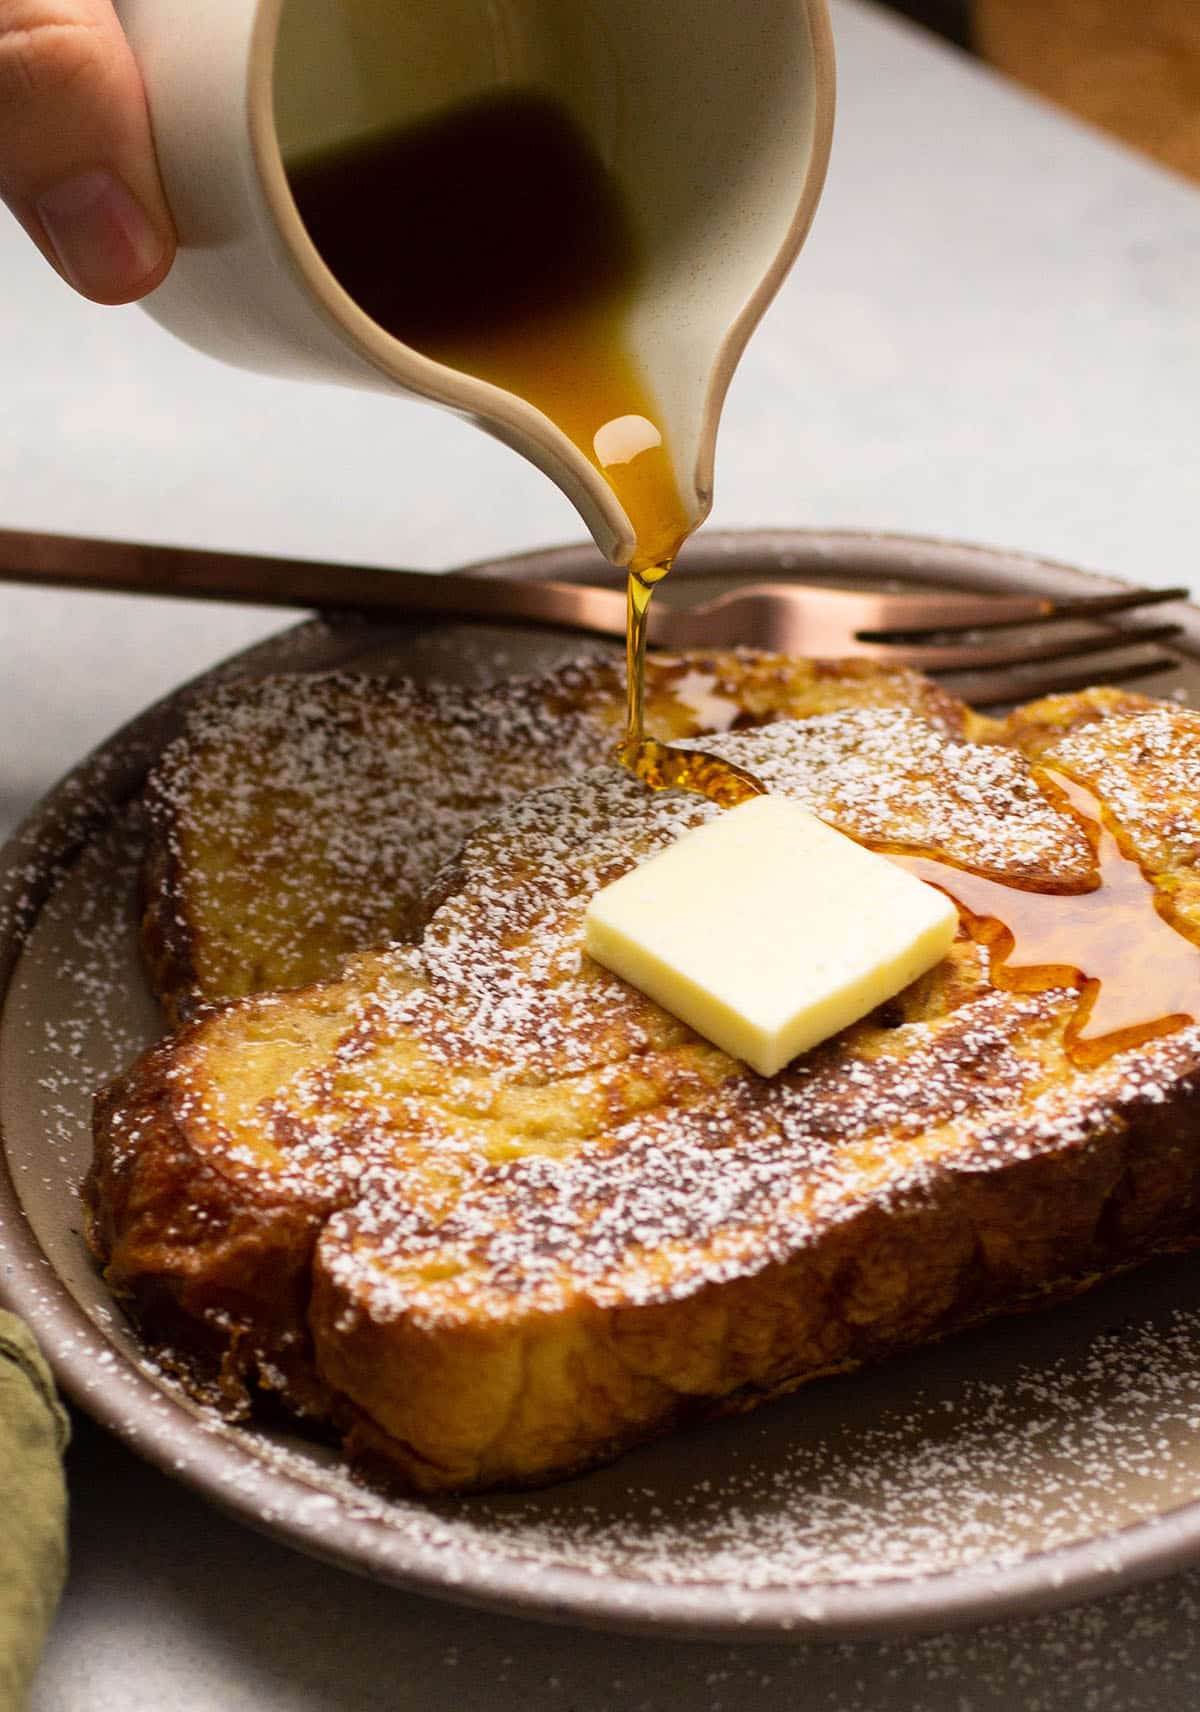 Hand pouring maple syrup over french toast slices.